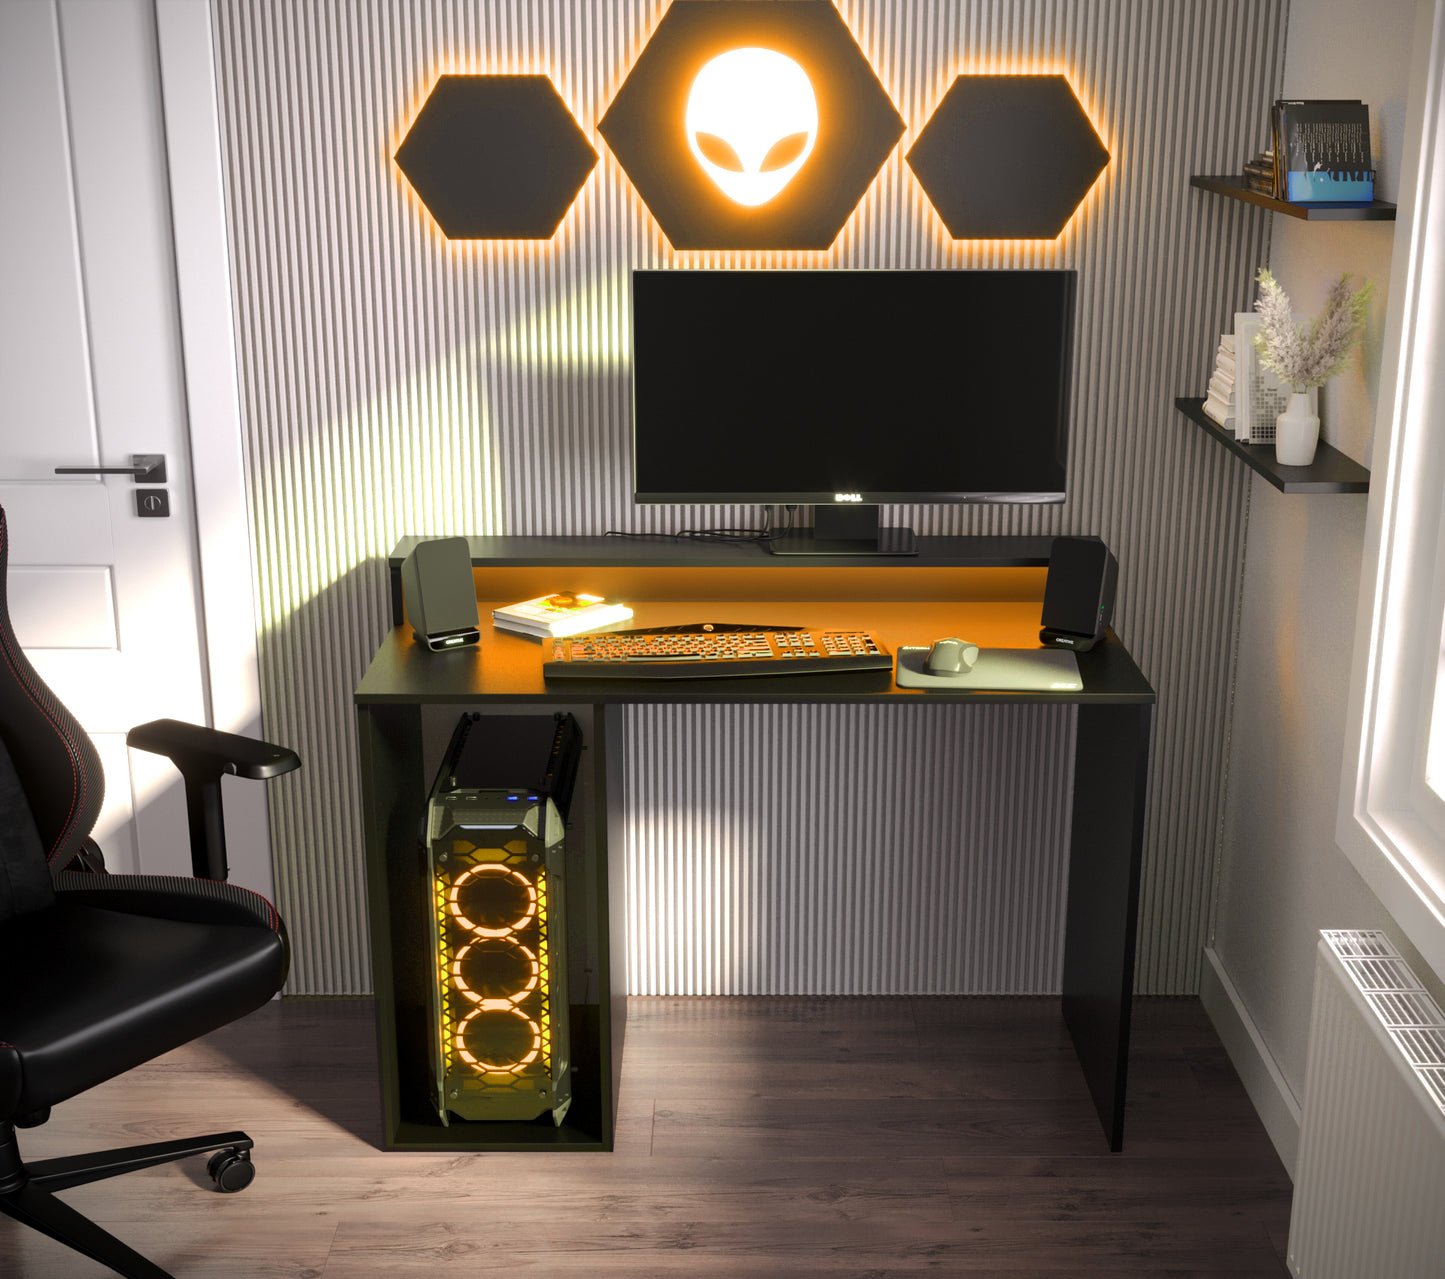 GAMER 2 - DESK FOR GAMERS WITH LED LIGHTS AVAILABLE, BLACK OR WHITE COLOUR